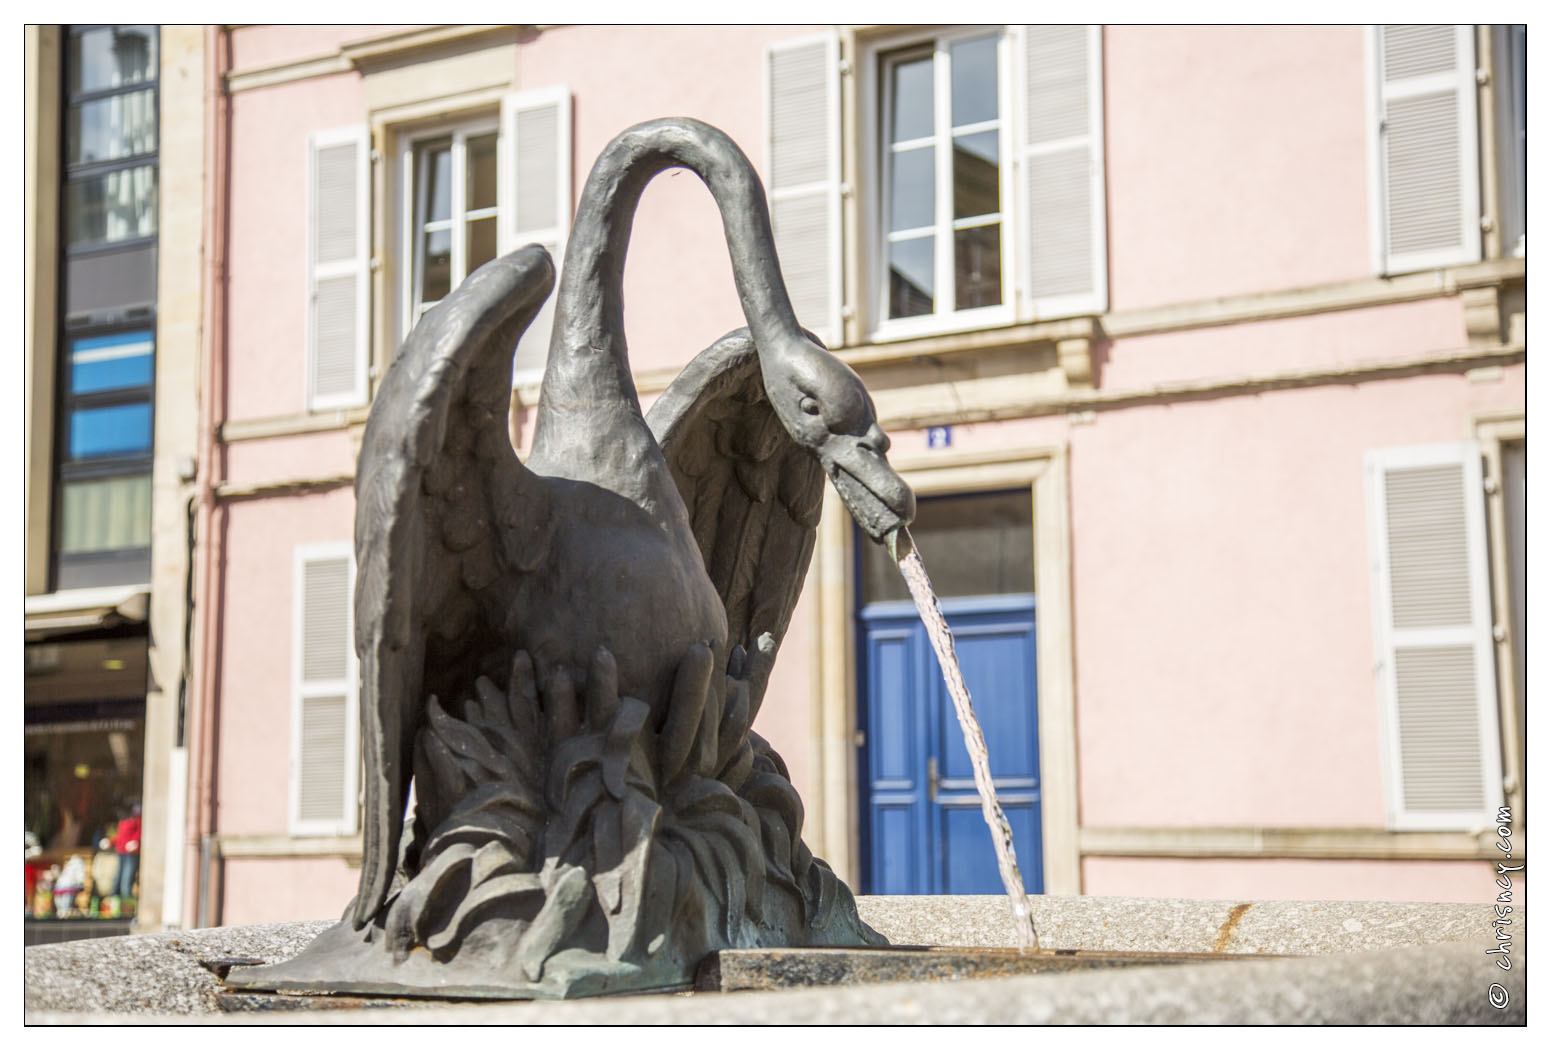 20140411-06_8796-Remiremont_fontaine.jpg